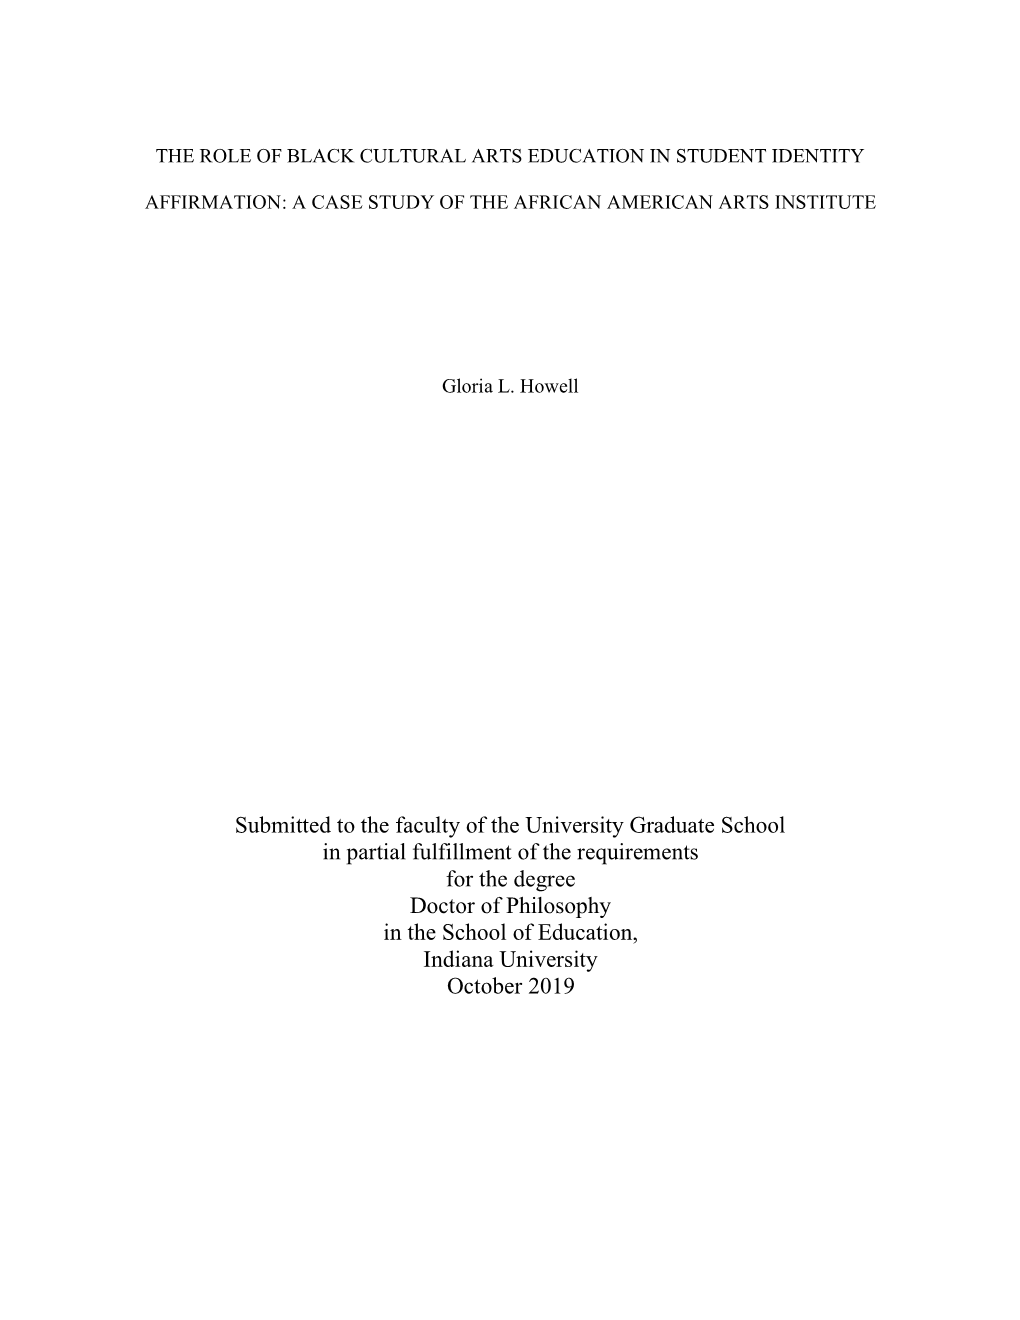 Submitted to the Faculty of the University Graduate School In